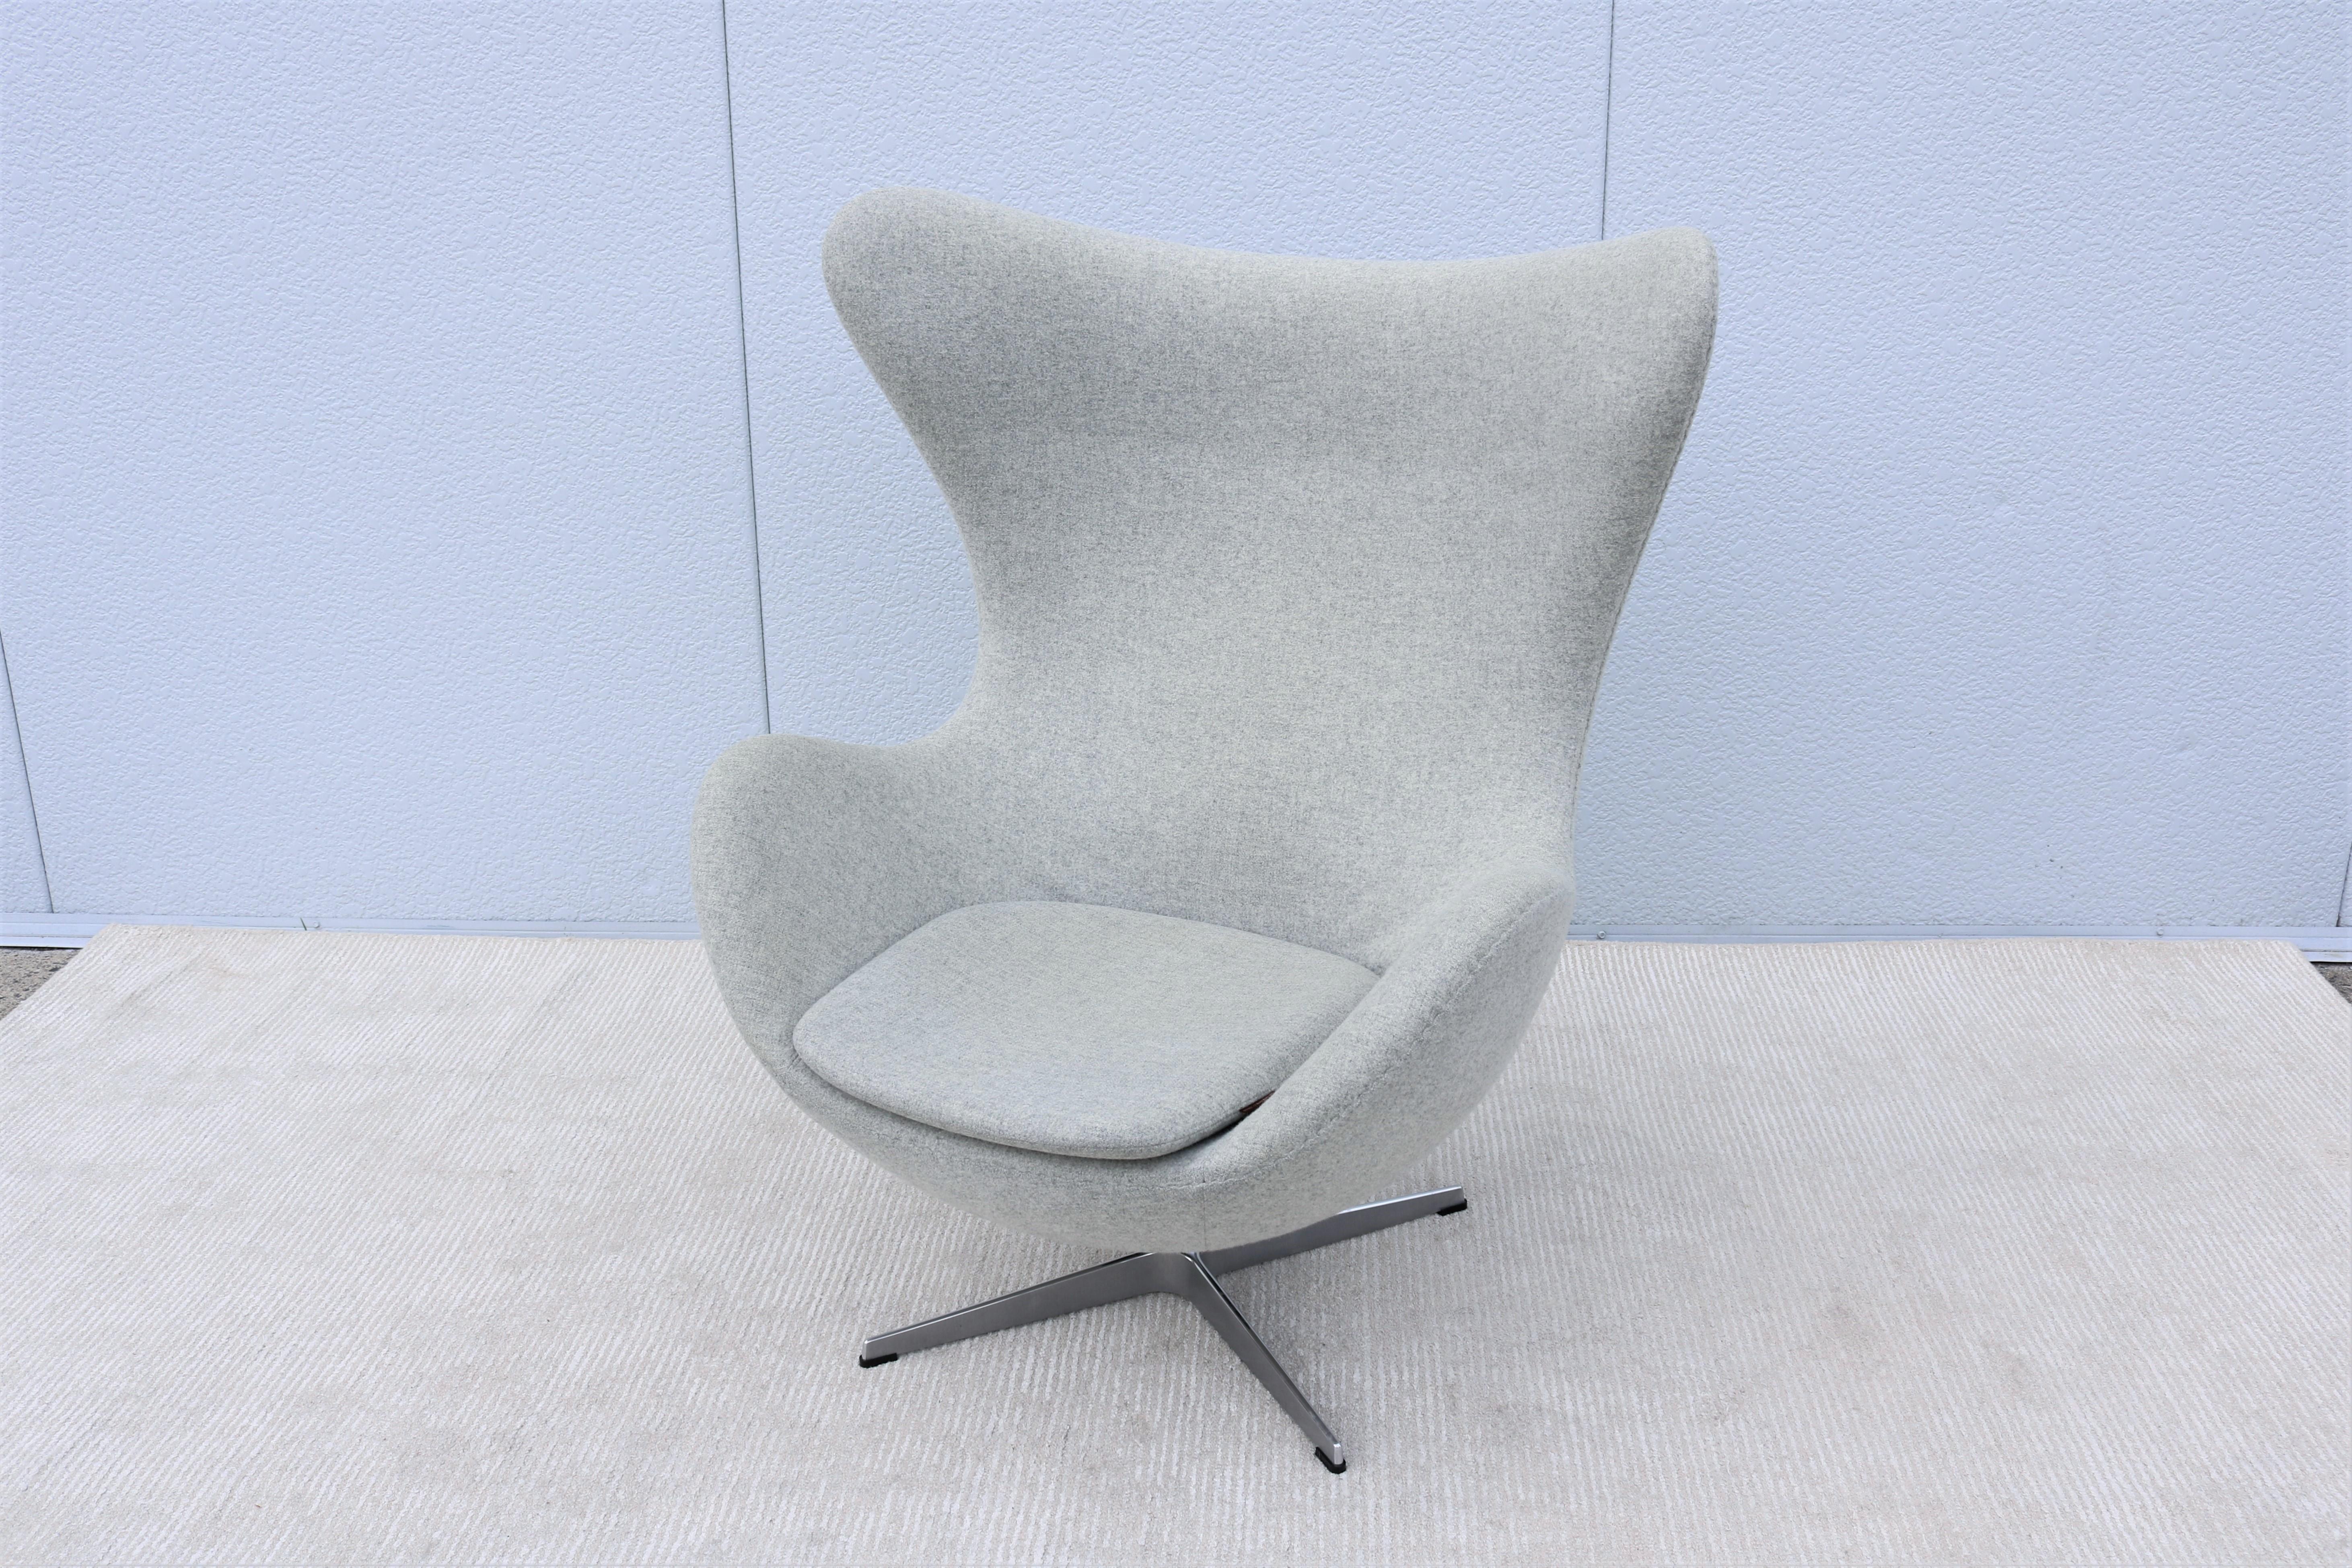 The beautiful Egg chair by Arne Jacobsen is an everlasting Danish design masterpiece, like a sculptor.
Jacobsen strived to shape the shell's perfect form by experimenting with wire and plaster in his garage.
Jacobsen designed the Egg for the lobby